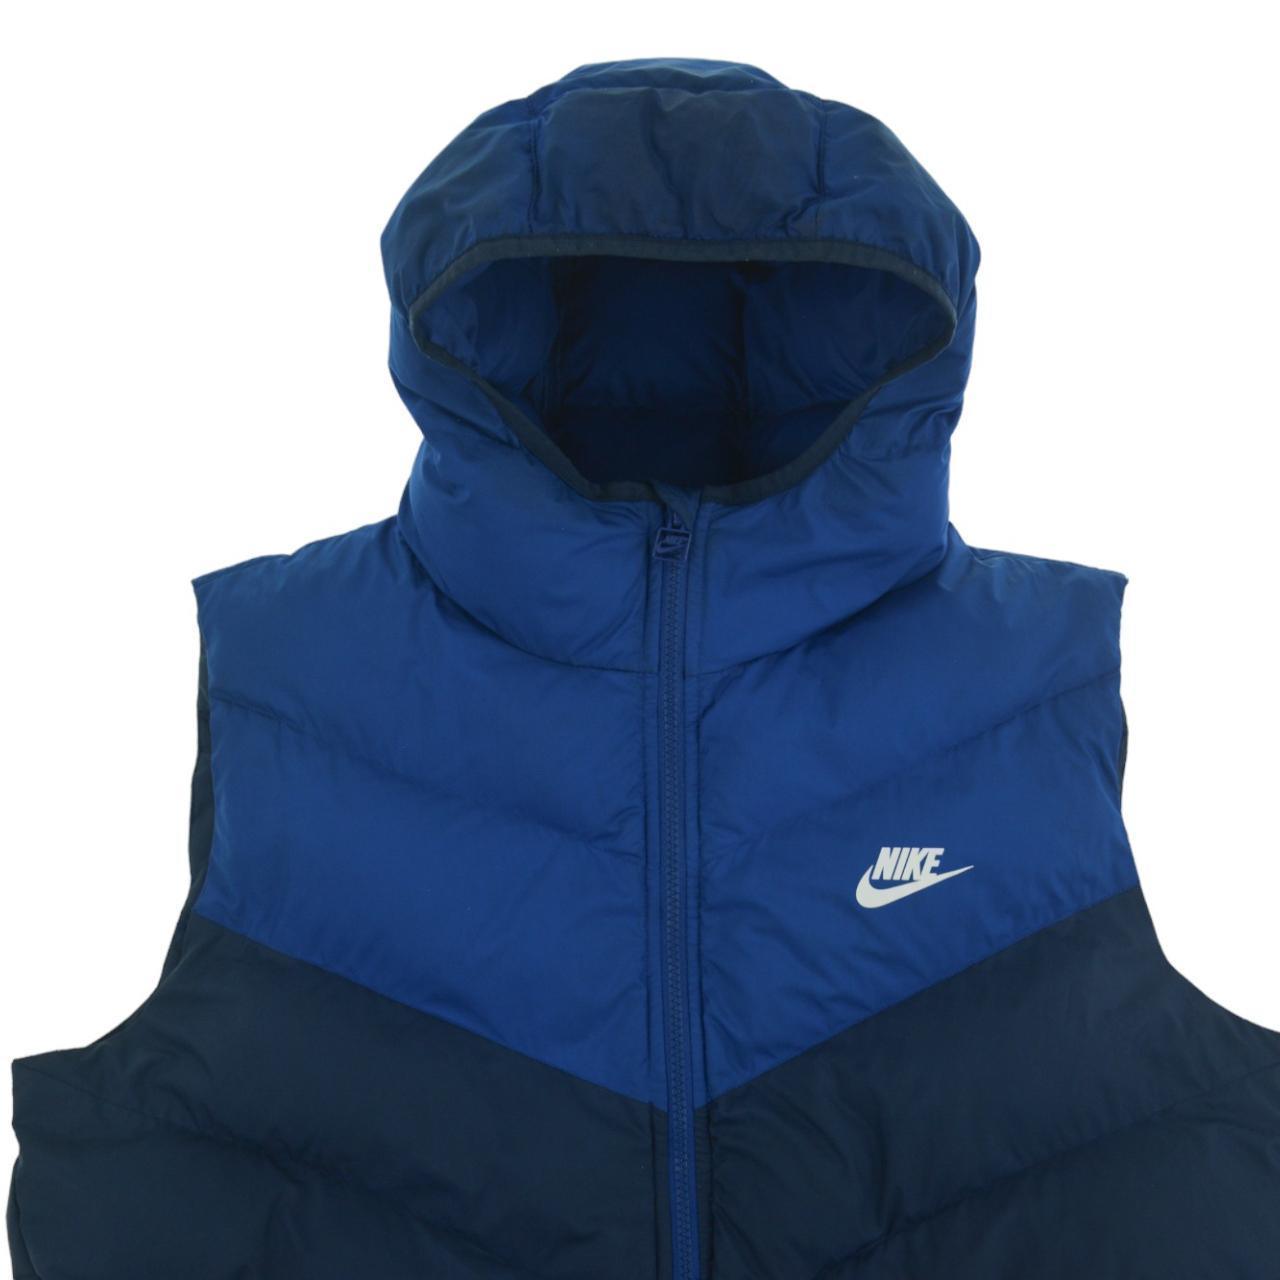 Vintage Nike Hooded Puffer GIlet Size L - Known Source